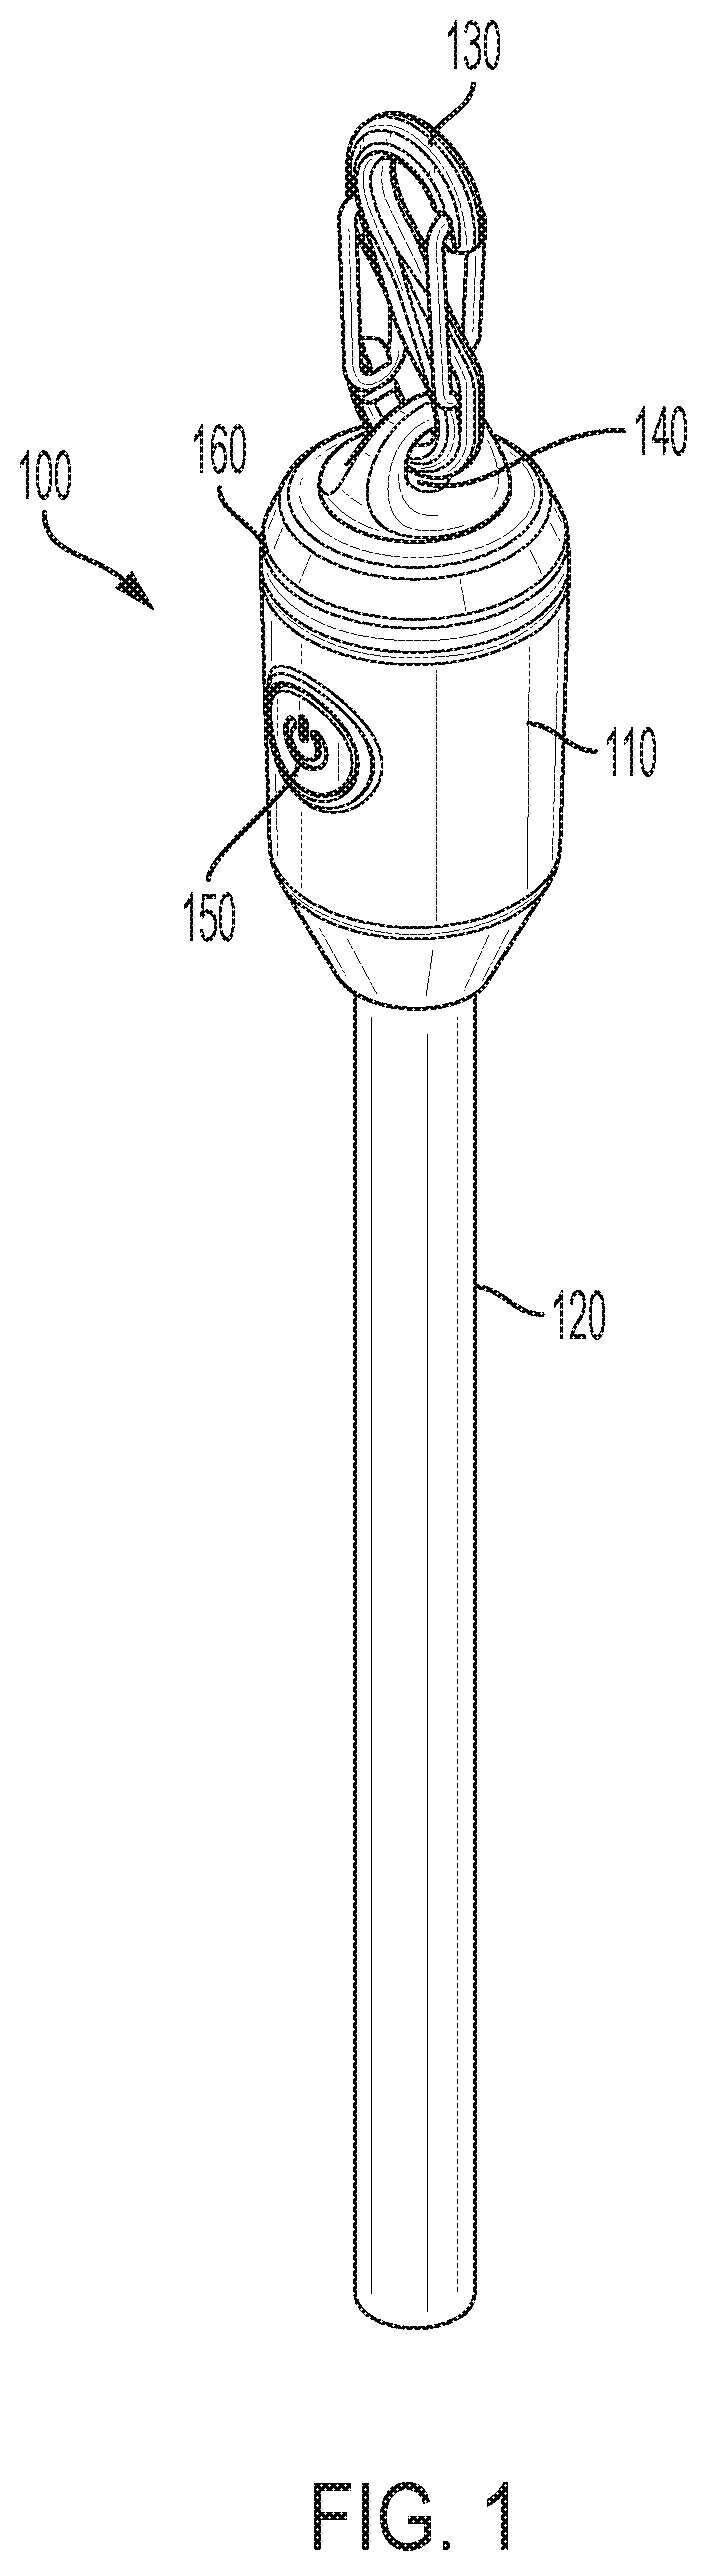 Systems and methods for an efficient, rechargeable glowstick